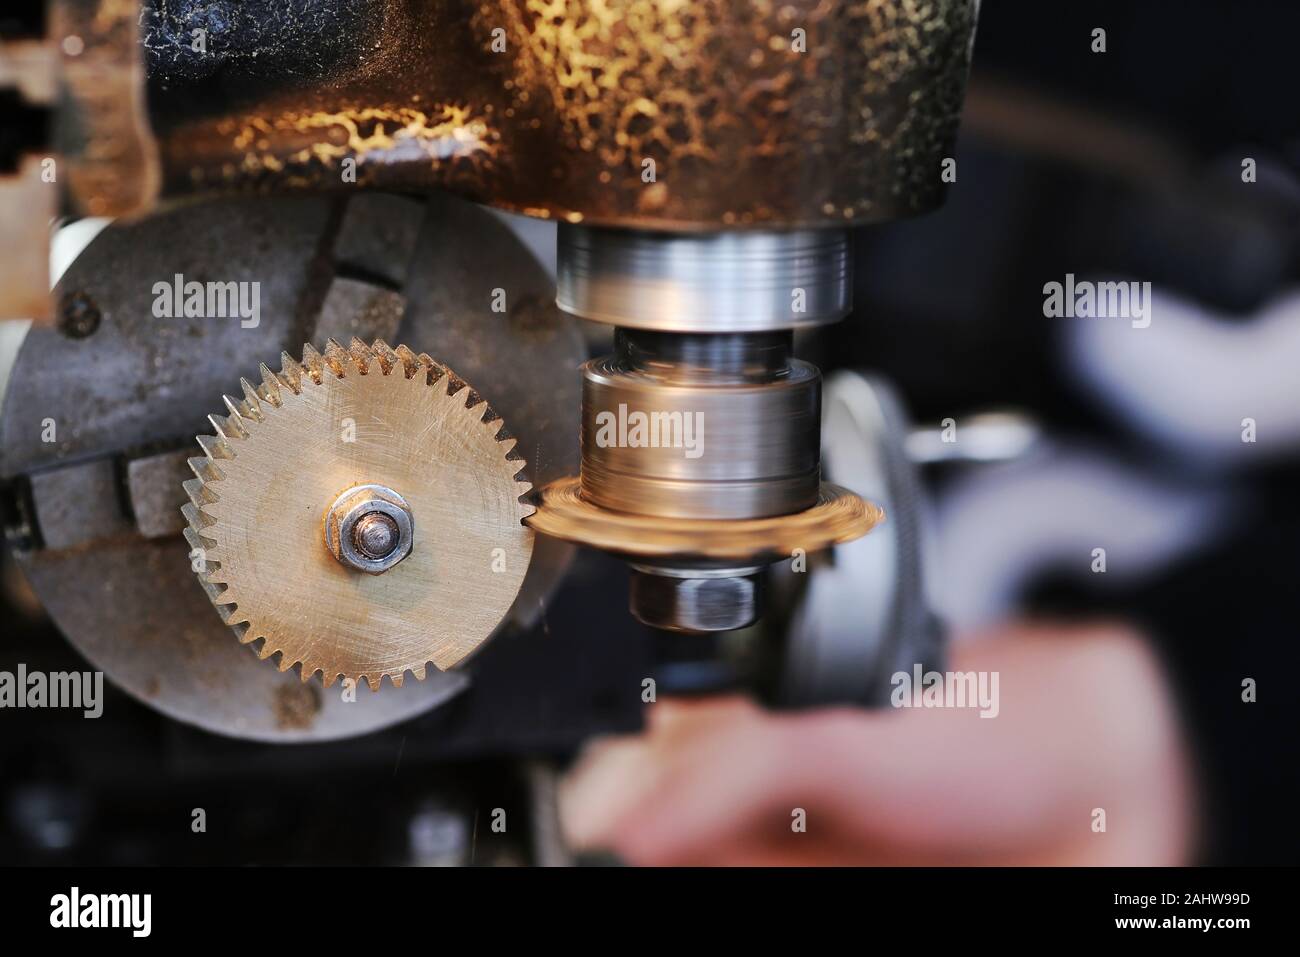 Production of a gear on the lathe Stock Photo